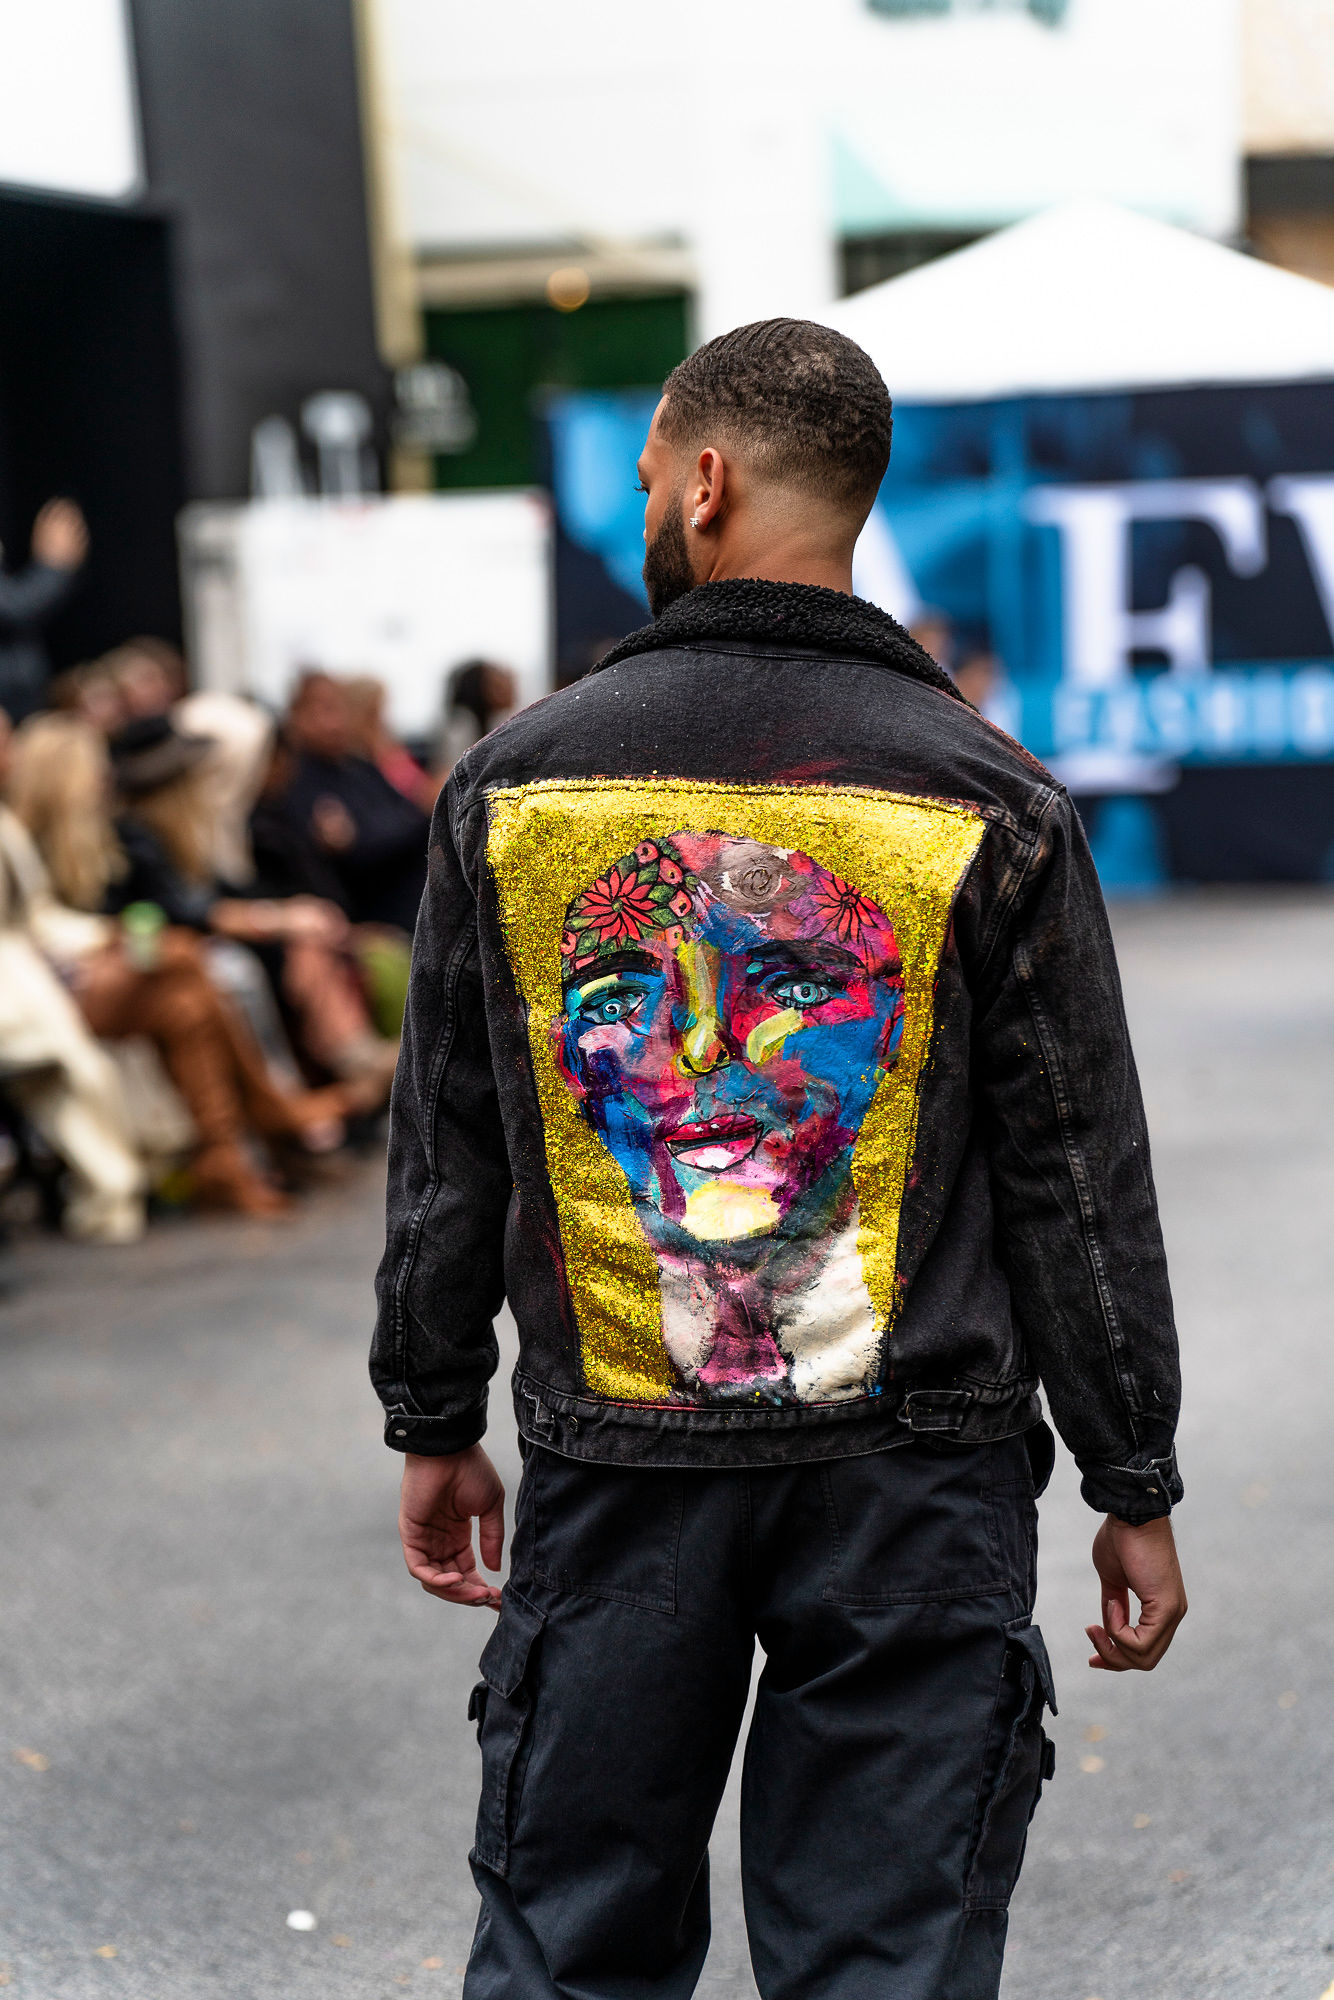 A man walking down the street wearing a jacket with a painting on it.